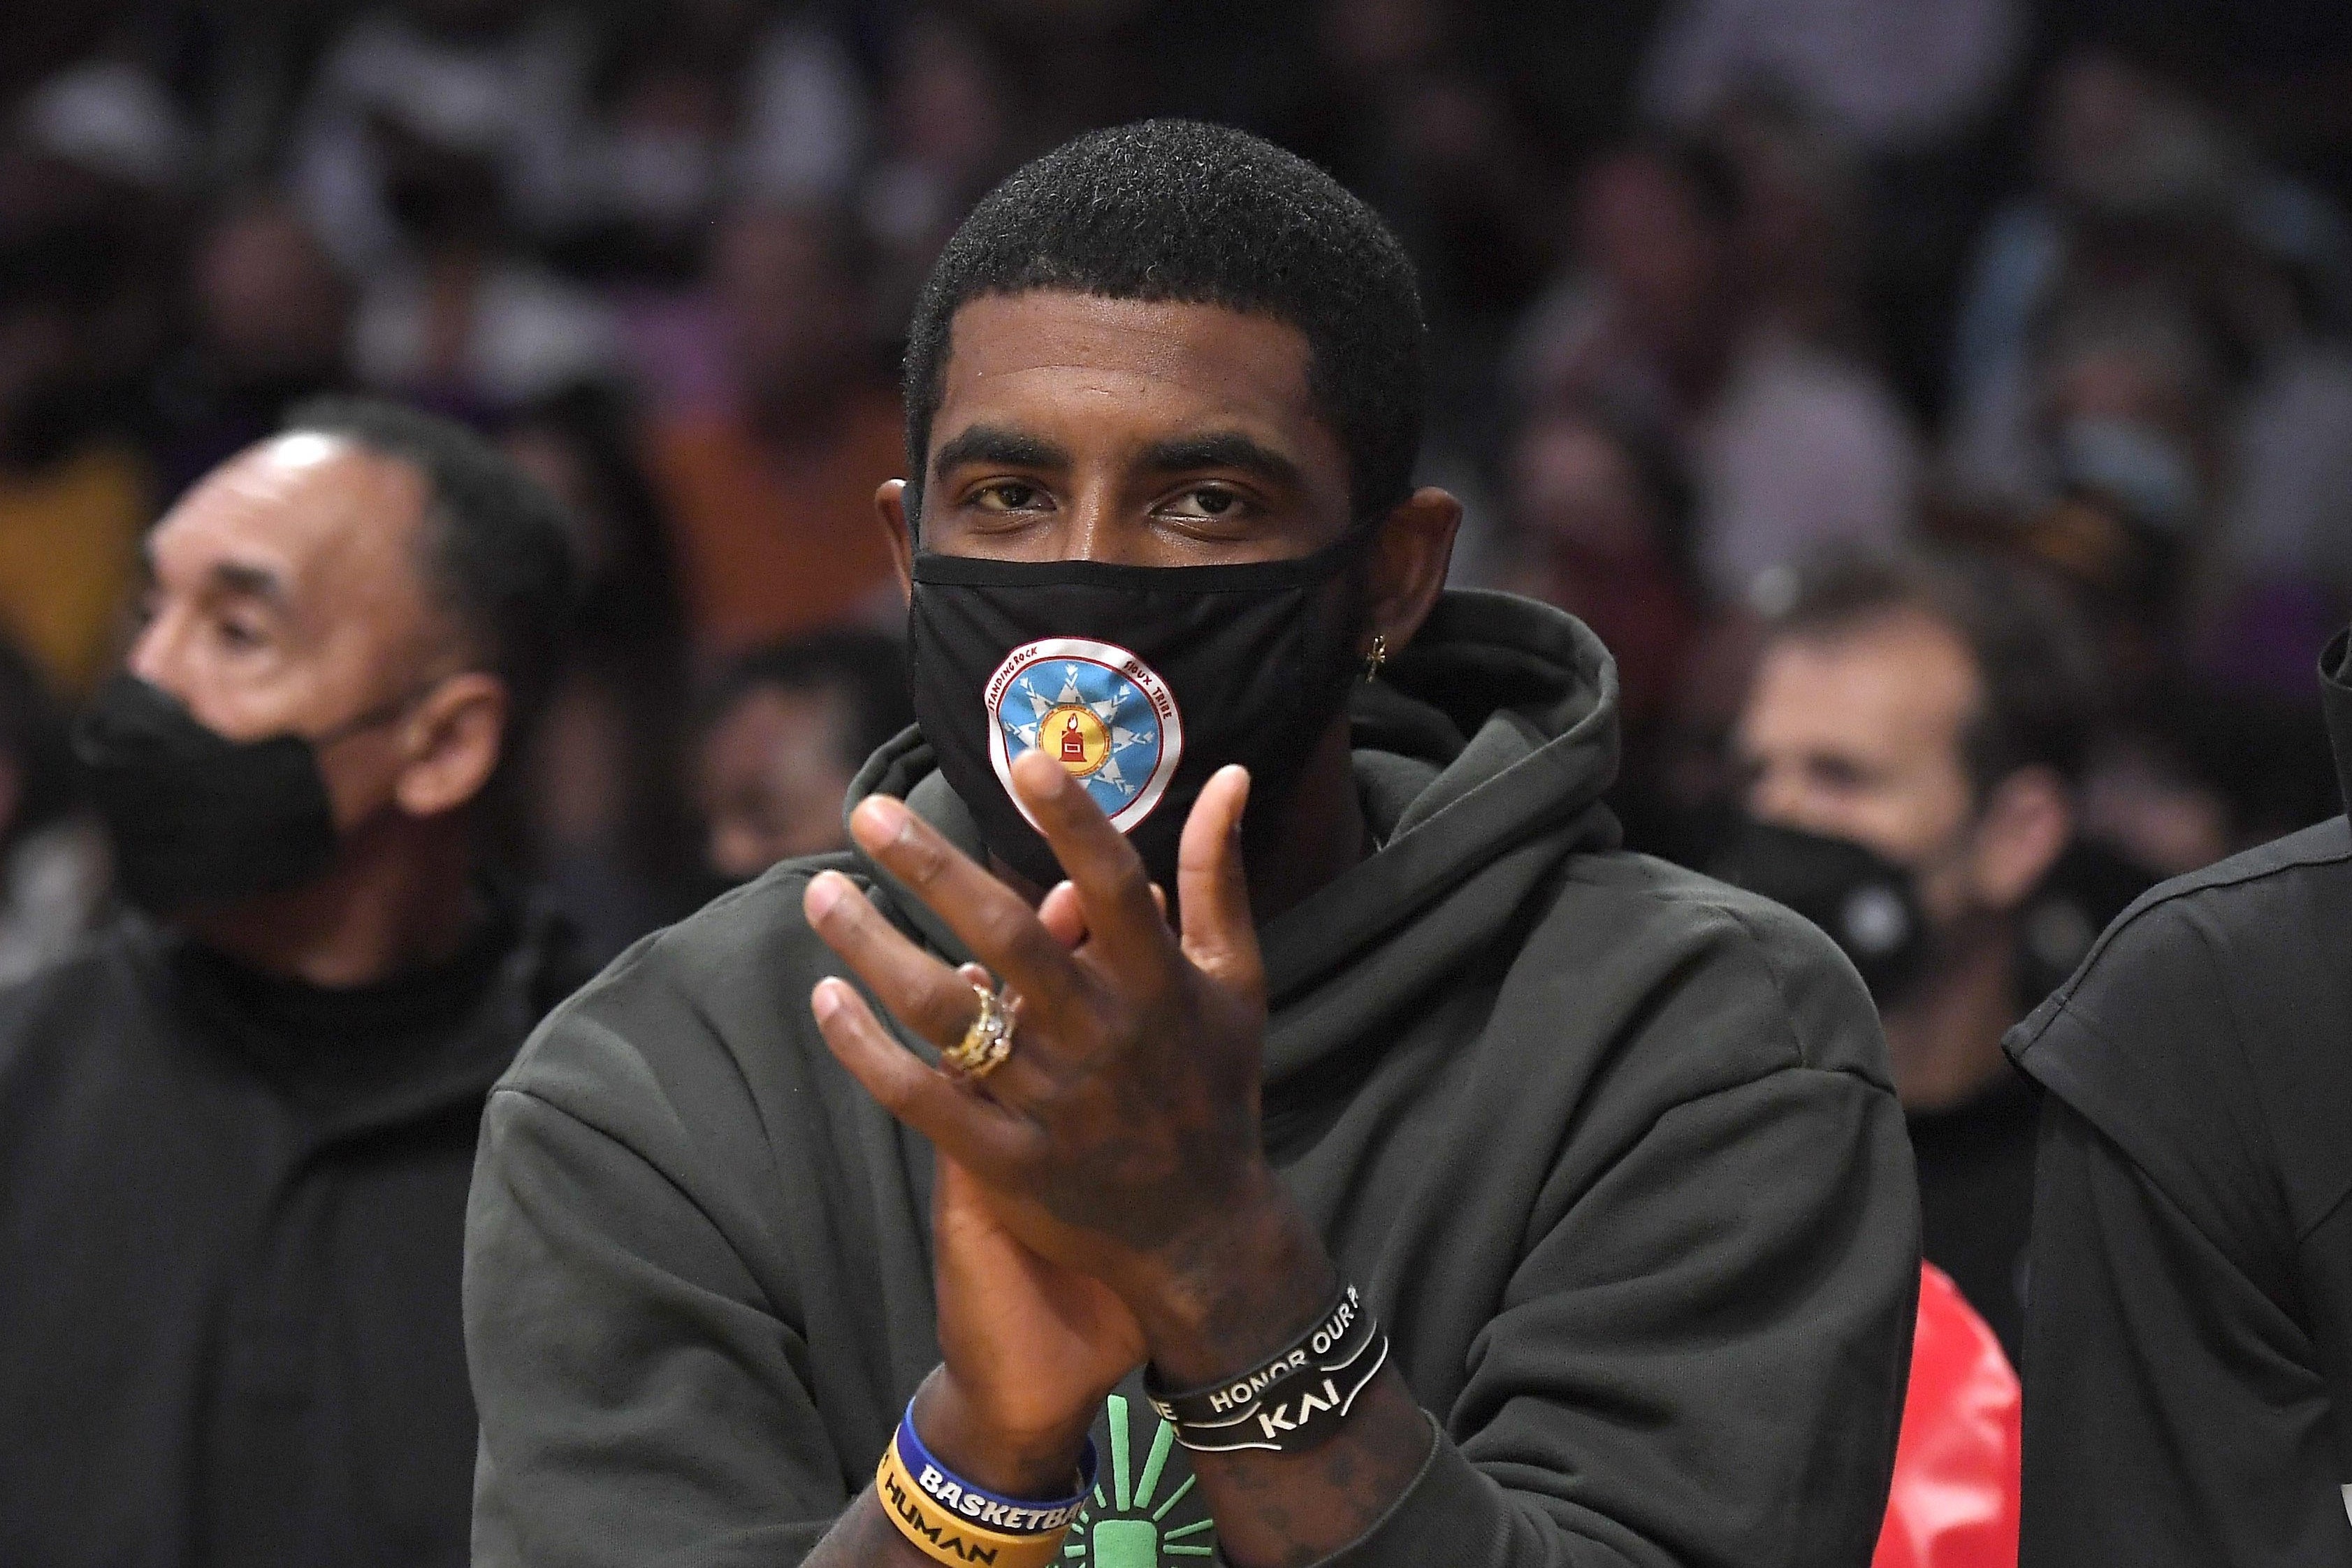 Kyrie seated in a hoodie and mask applauding.